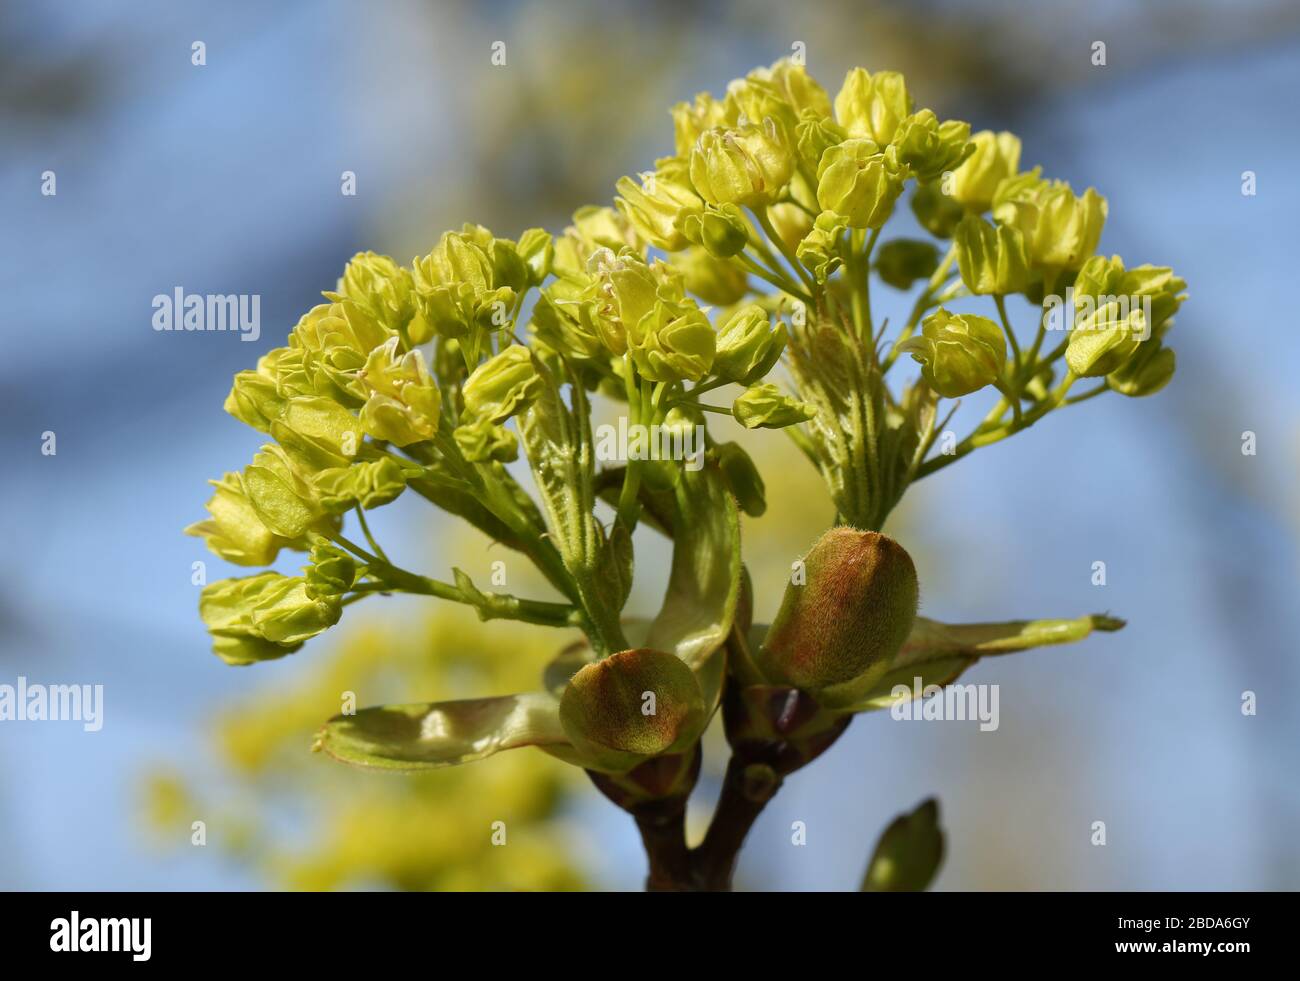 Buds opening into leaves and flowers  of a Field Maple Tree, Acer campestre, in springtime. Stock Photo